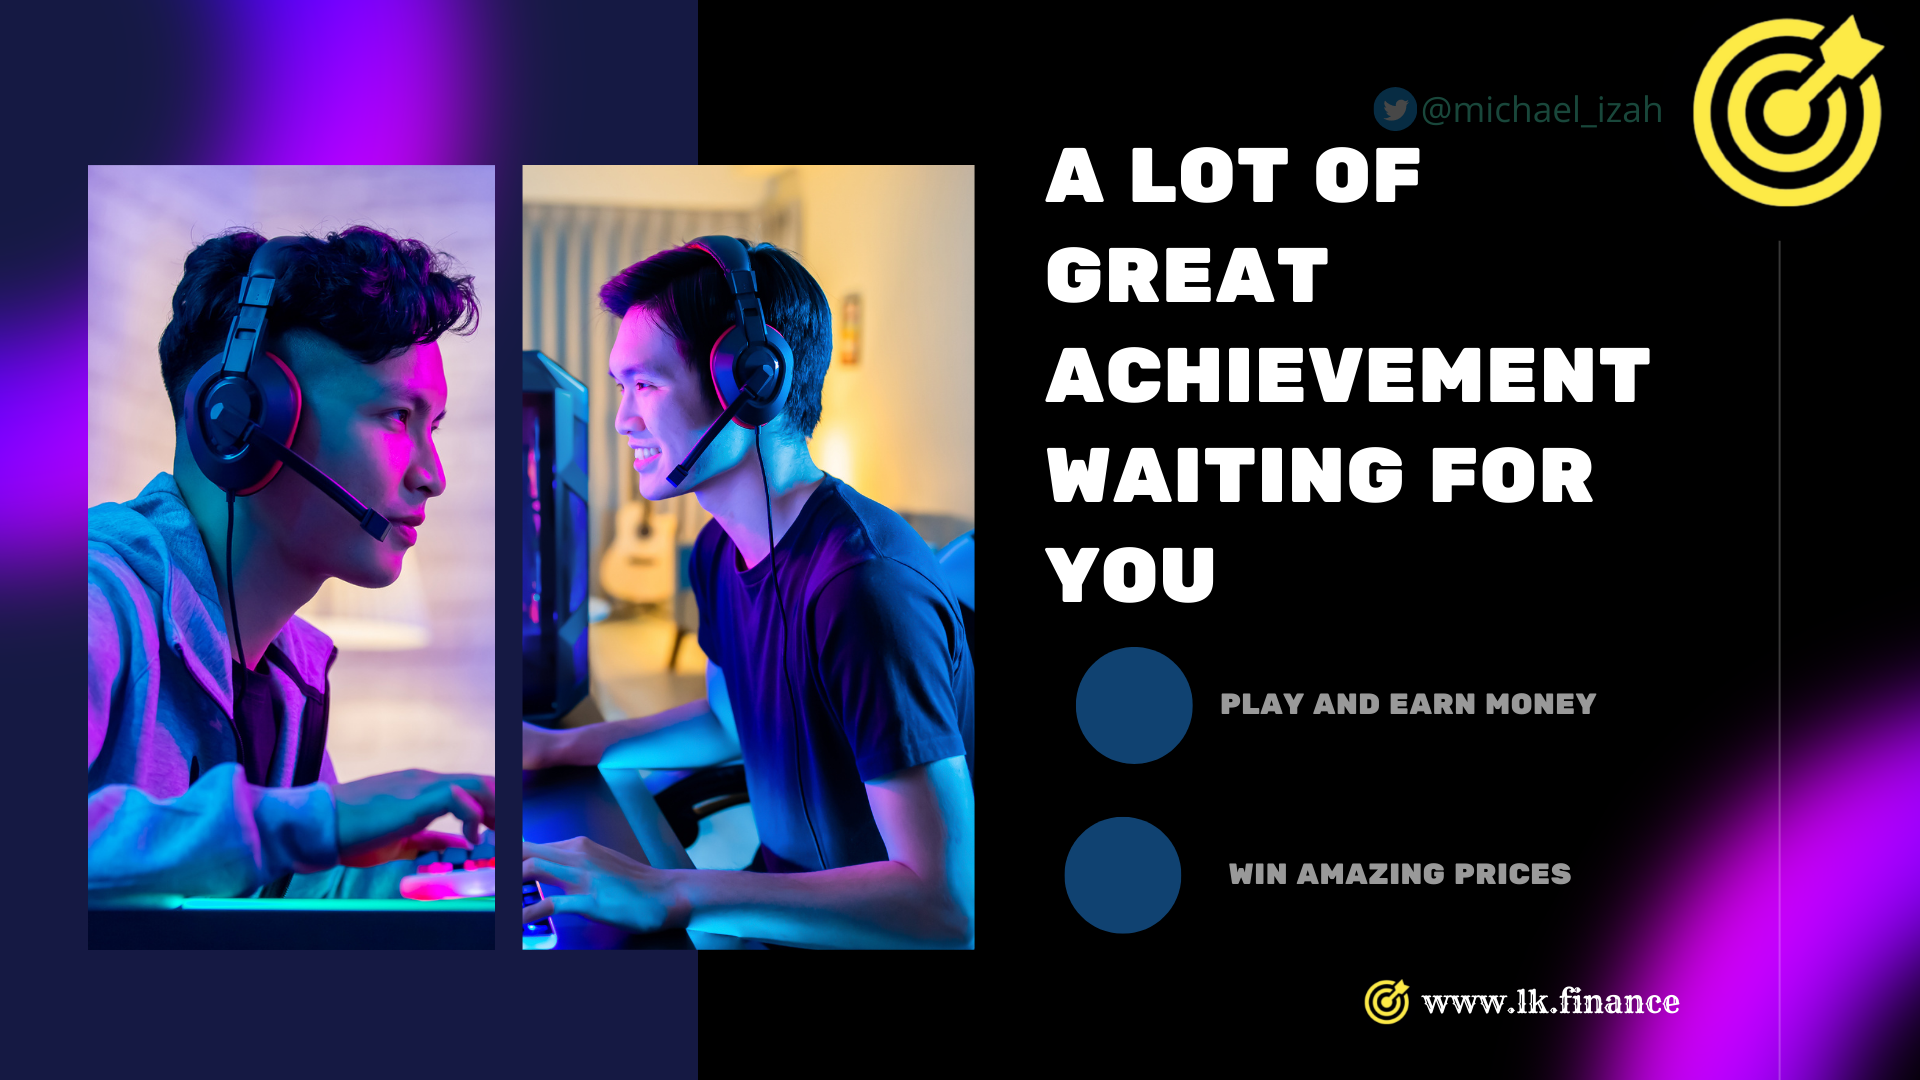 (WN @

GREAT
ACHIEVEMENT
WAITING FOR
pf]

PLAY AND EARN MONEY

 

WIN AMAZING PRICES

@ www.lk.finance